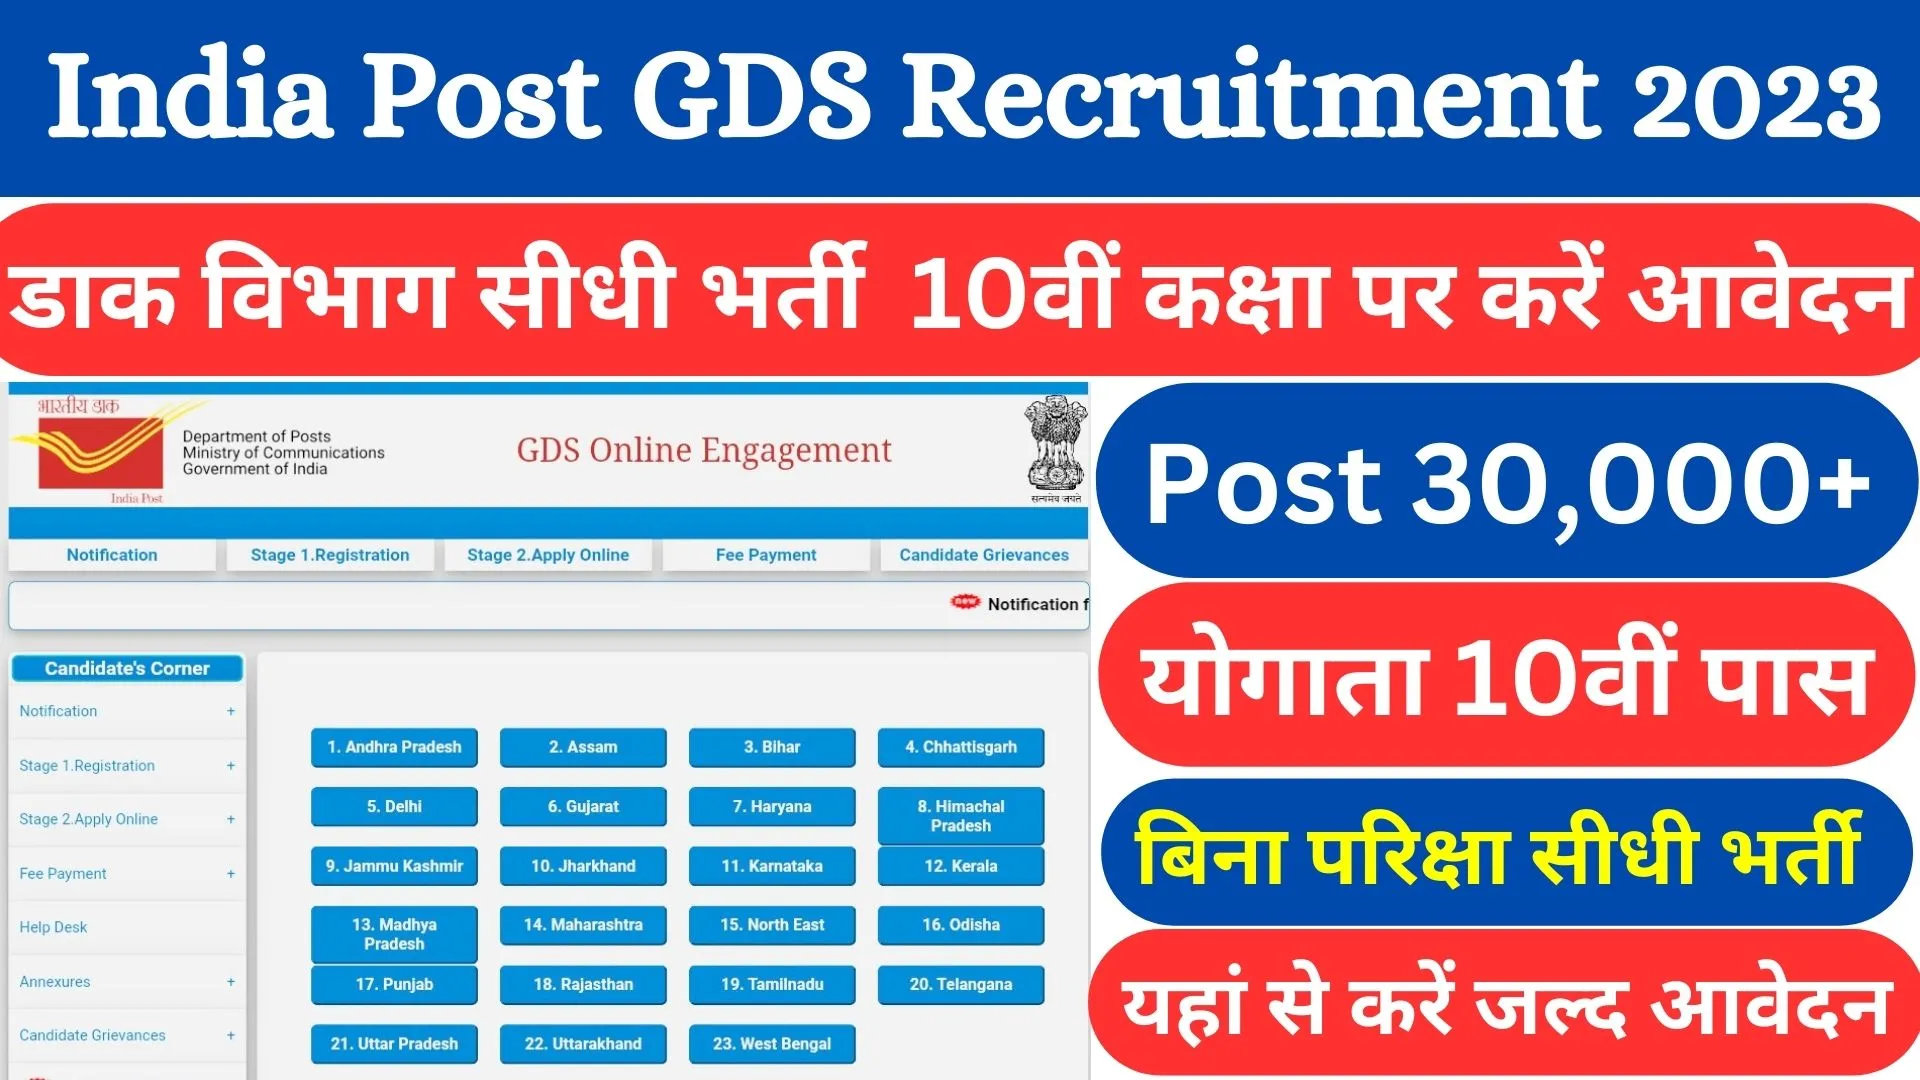 India Post GDS Recruitment 2023 India Post GDS Online Form 2023